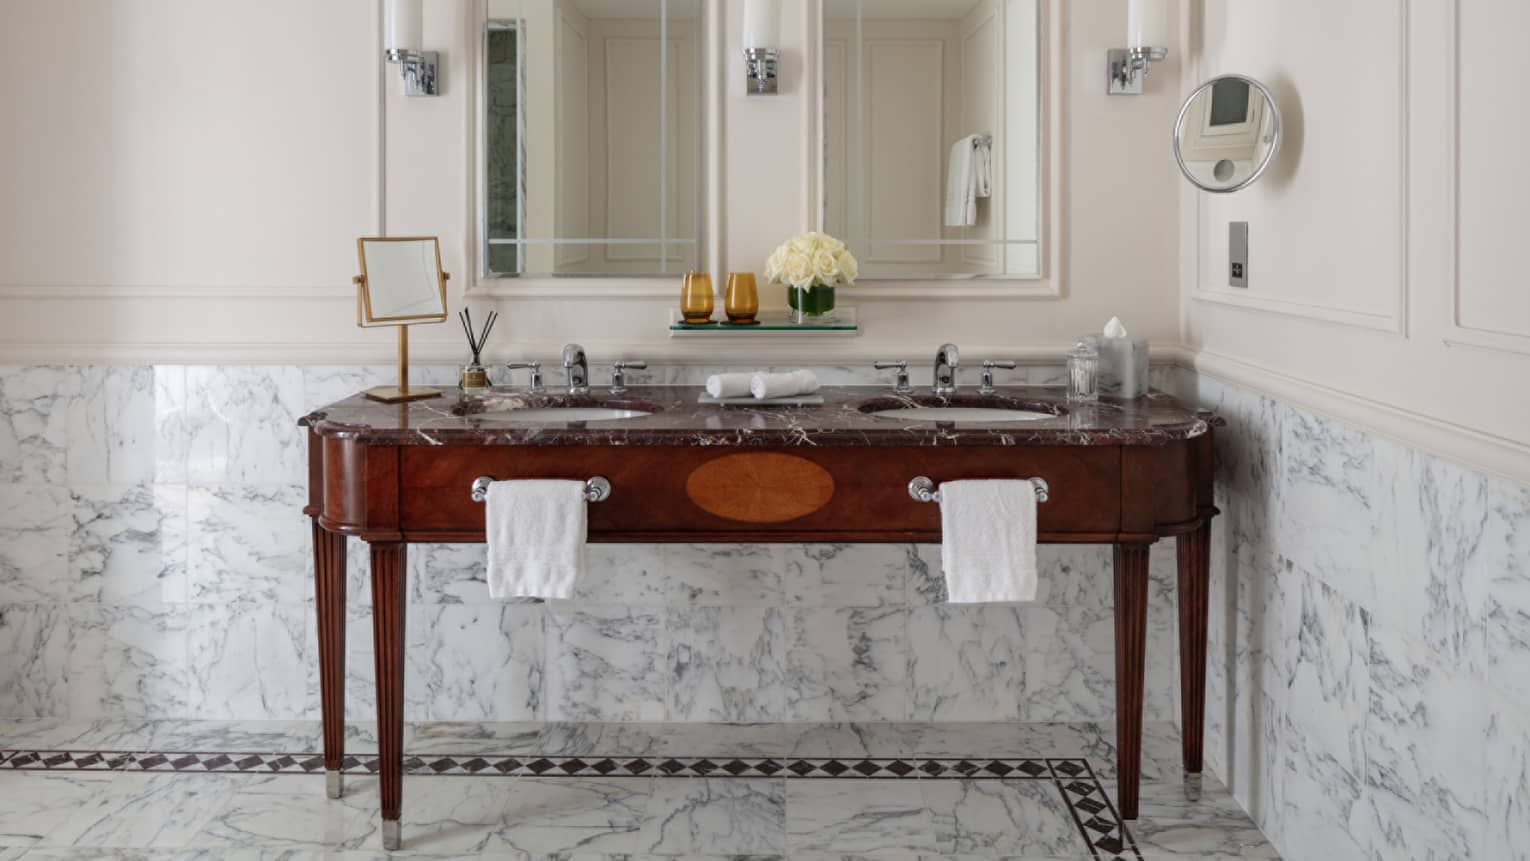 Bathroom with double wooden vanity, double mirror, marble tiles at chair rail, lighted wall sconces